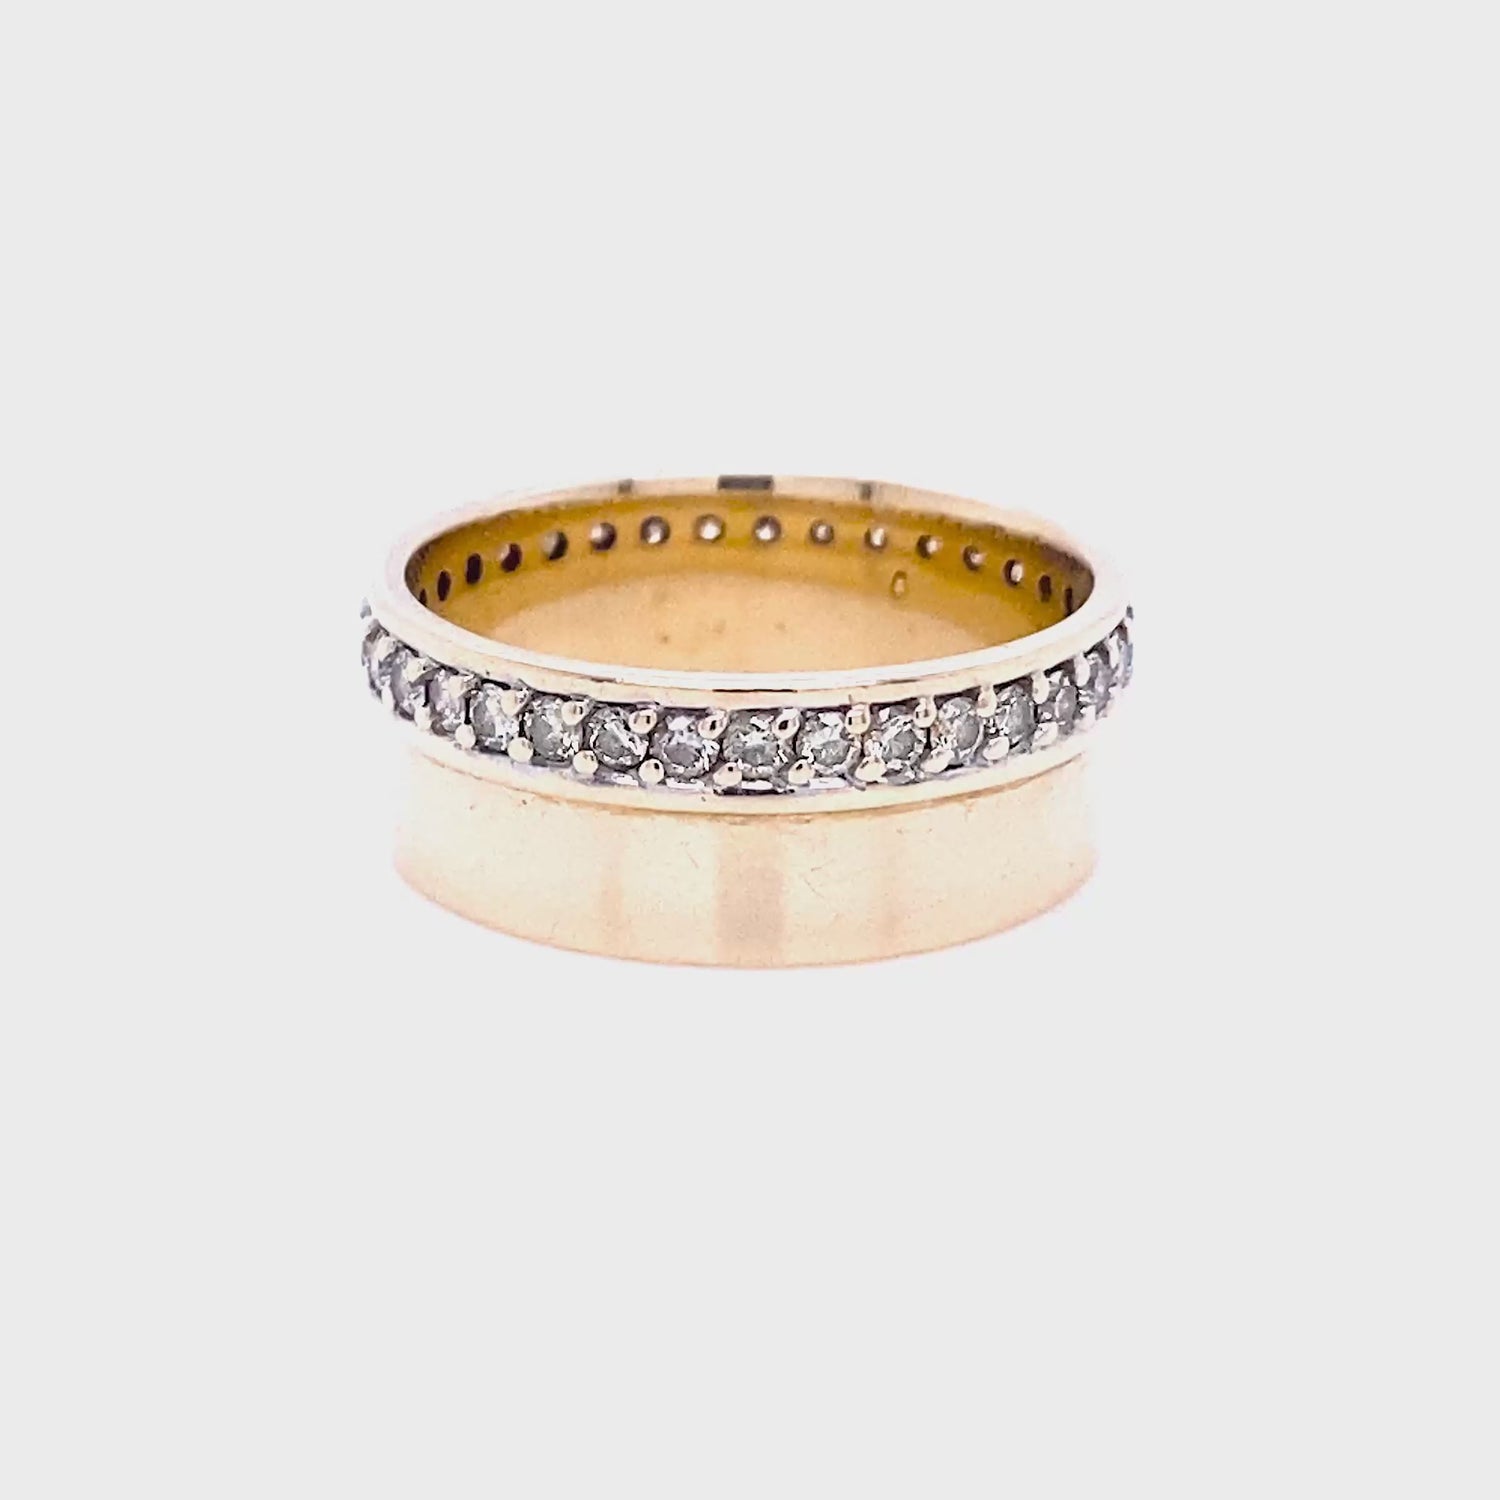 Running Out 0.75 CT Round Cut Diamond Wedding Band in 14KT Yellow Gold